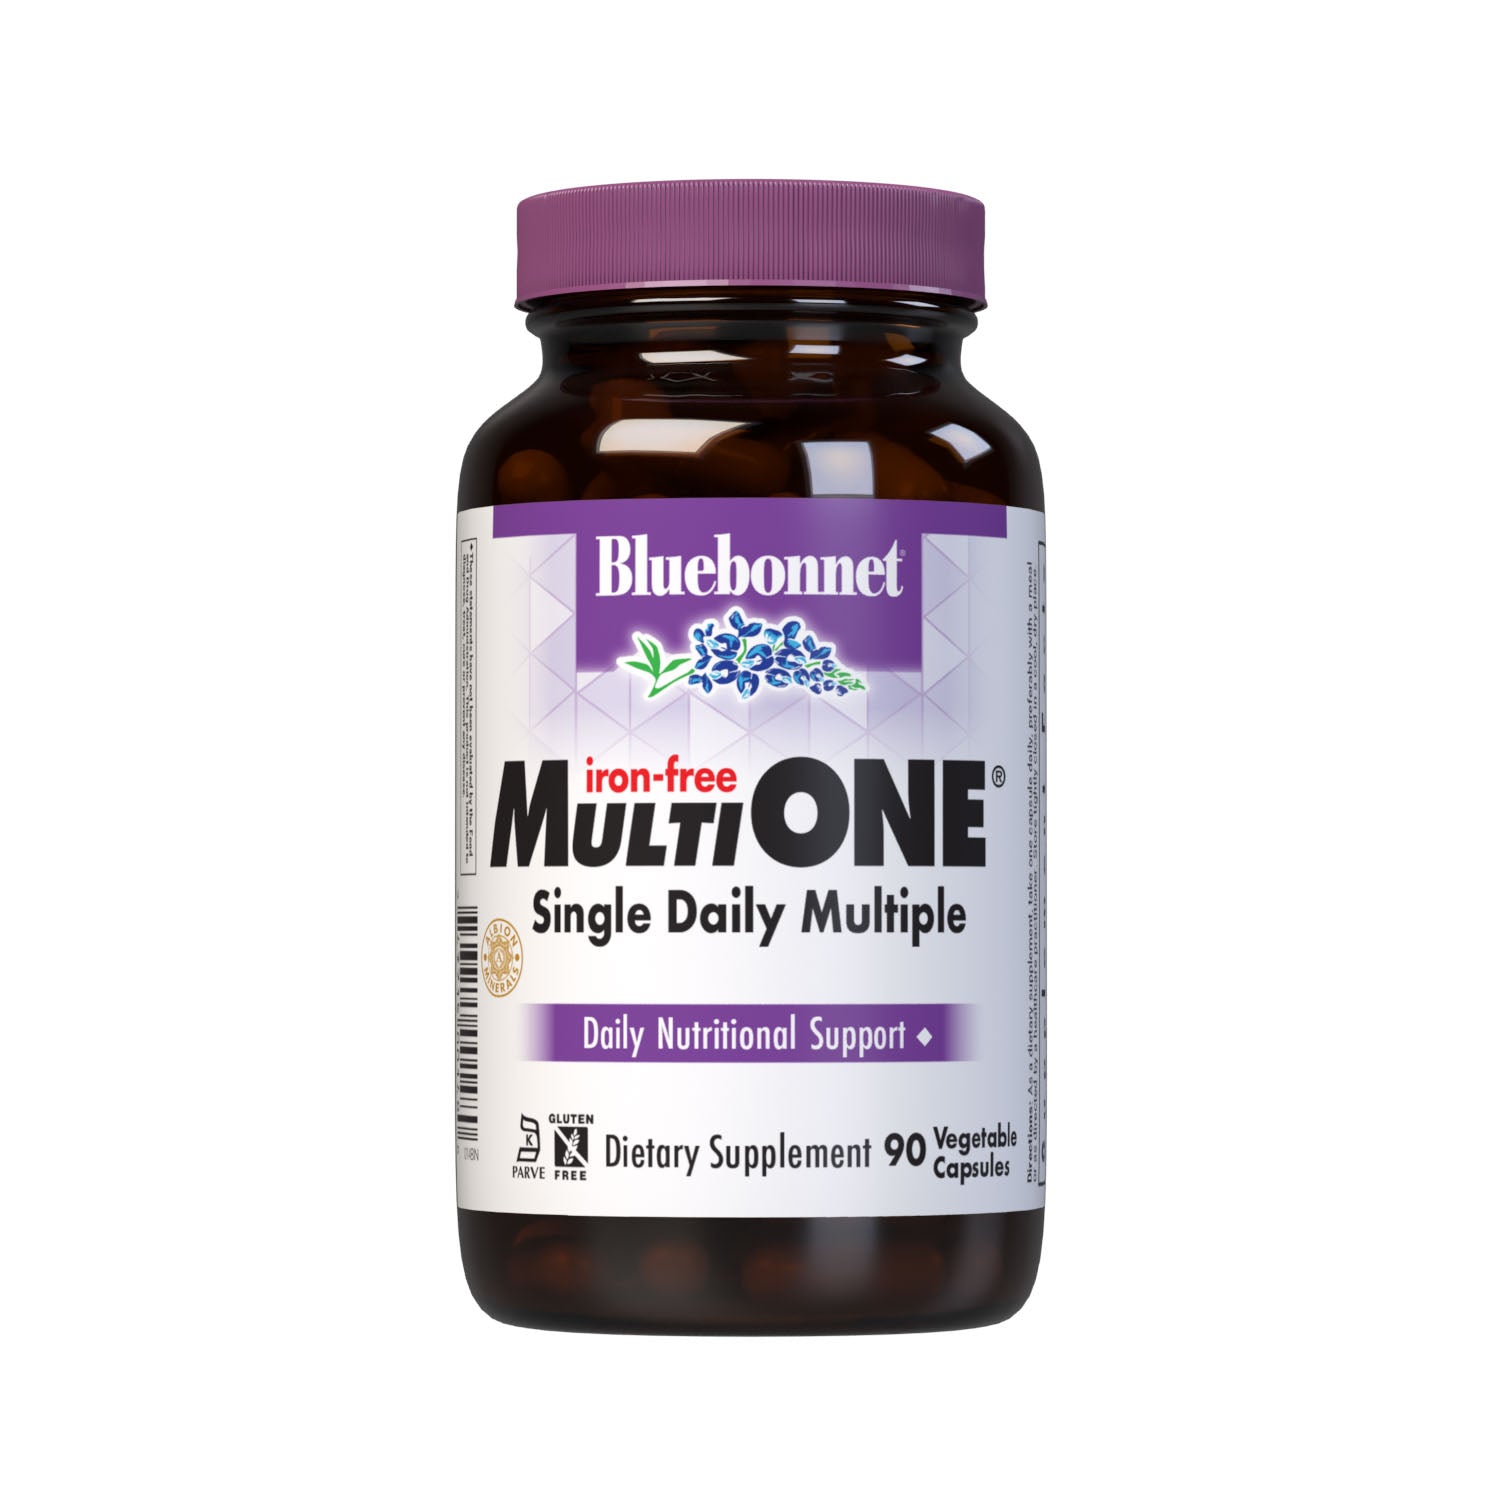 Bluebonnet’s Multi One Iron-free Single Daily Multiple 90 vegetable capsules is formulated with crucial vitamins and minerals, plus Albion chelated minerals for daily nutrition and well being. #size_90 count